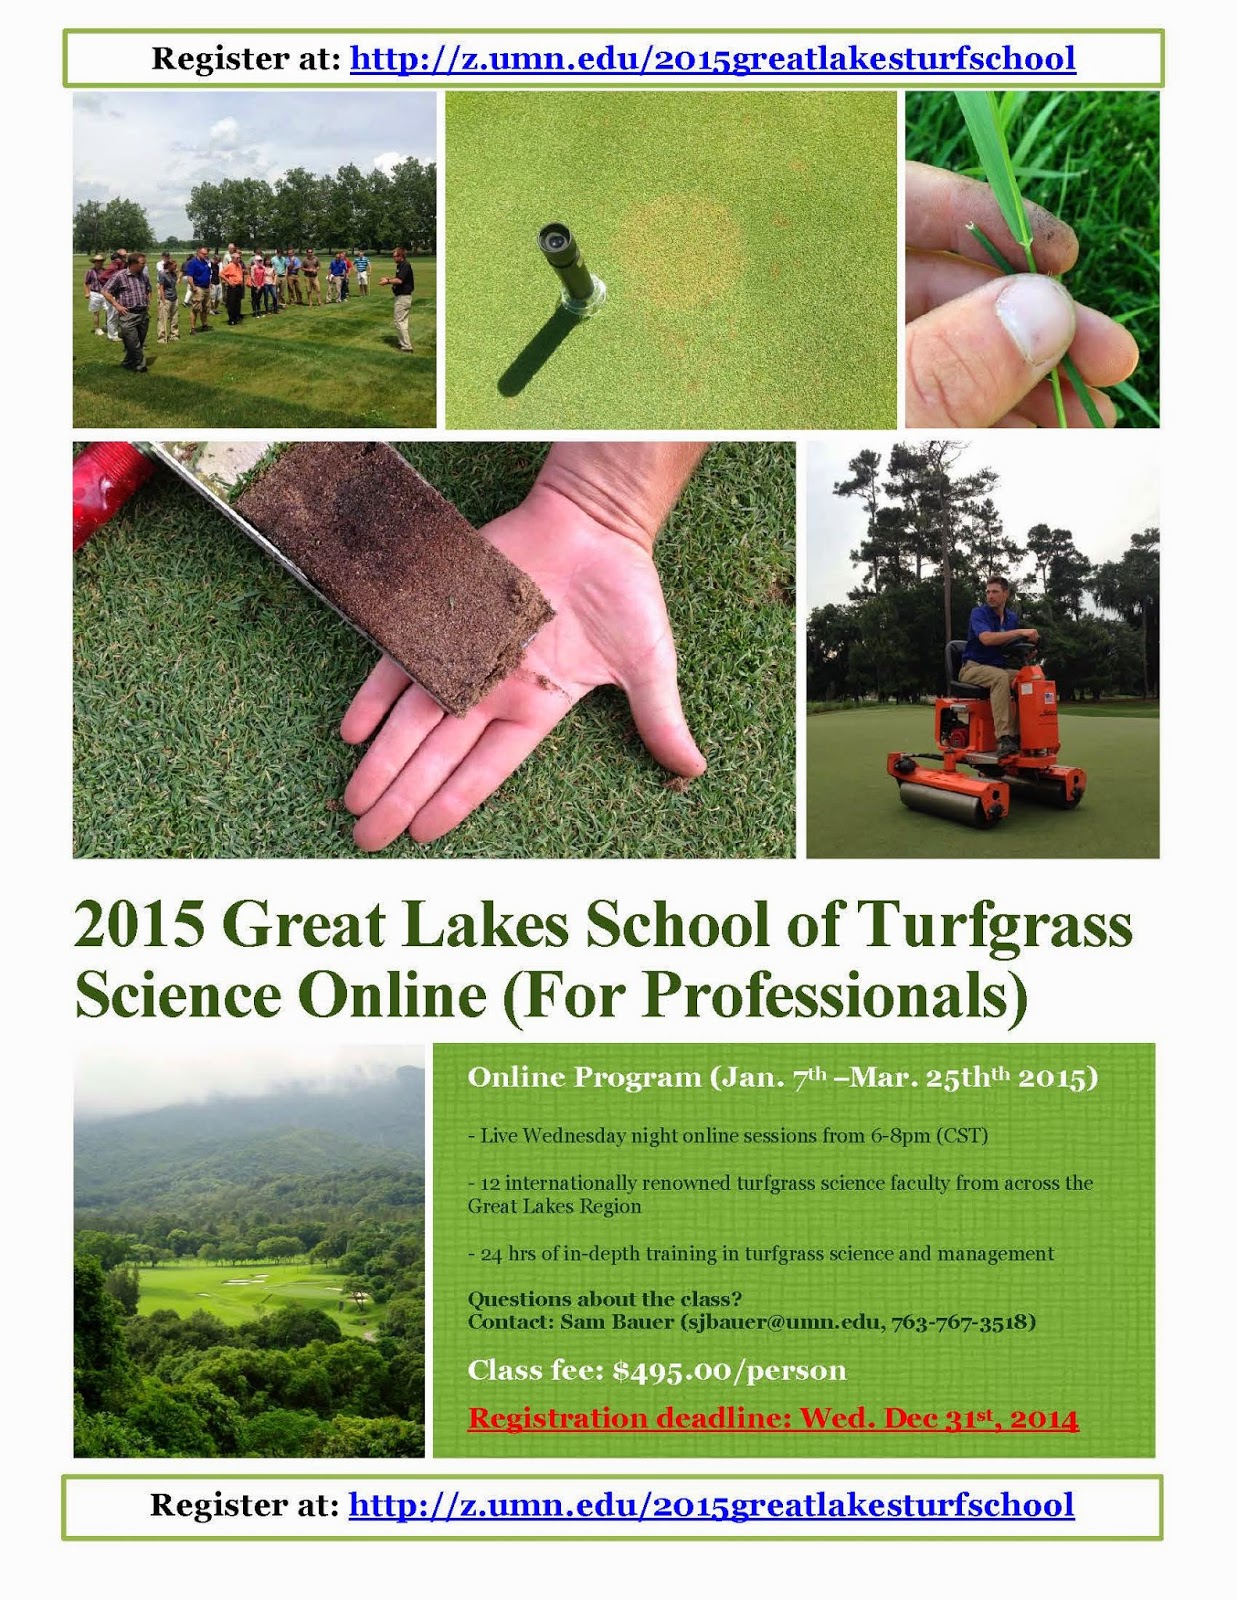 2015 Great Lakes School Of Turfgrass Science Online For Professionals